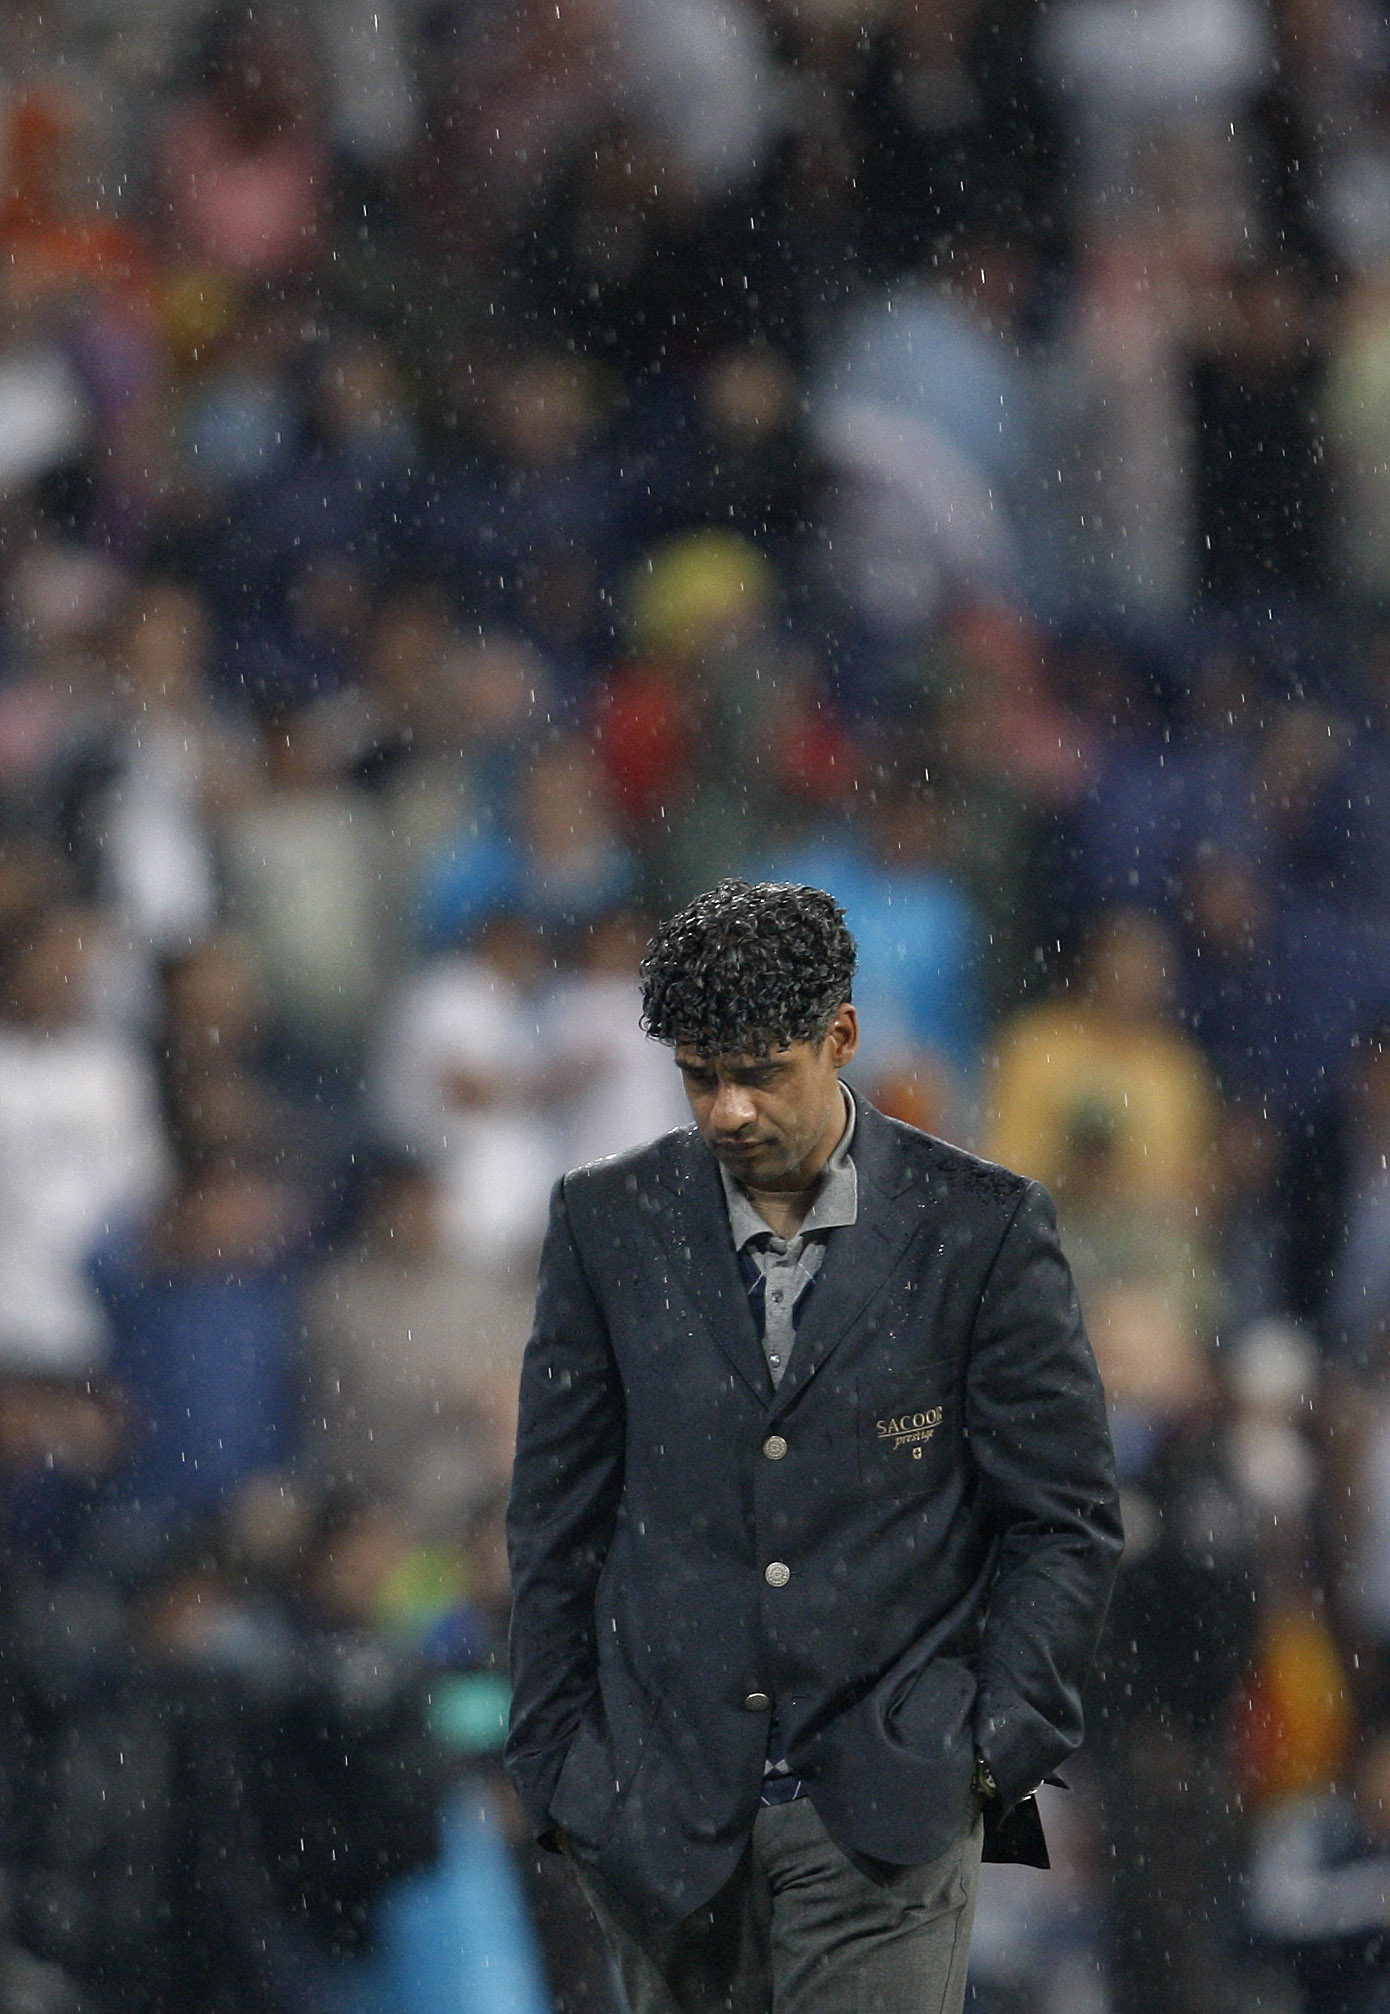 MADRID, SPAIN - MAY 07:  Coach Frank Rijkaard of Barcelona looks dejected during the La Liga match between Real Madrid and Barcelona at the Santiago Bernabeu Stadium on May 7, 2008 in Madrid, Spain. Barcelona lost the match 4-1.  (Photo by Jasper Juinen/G